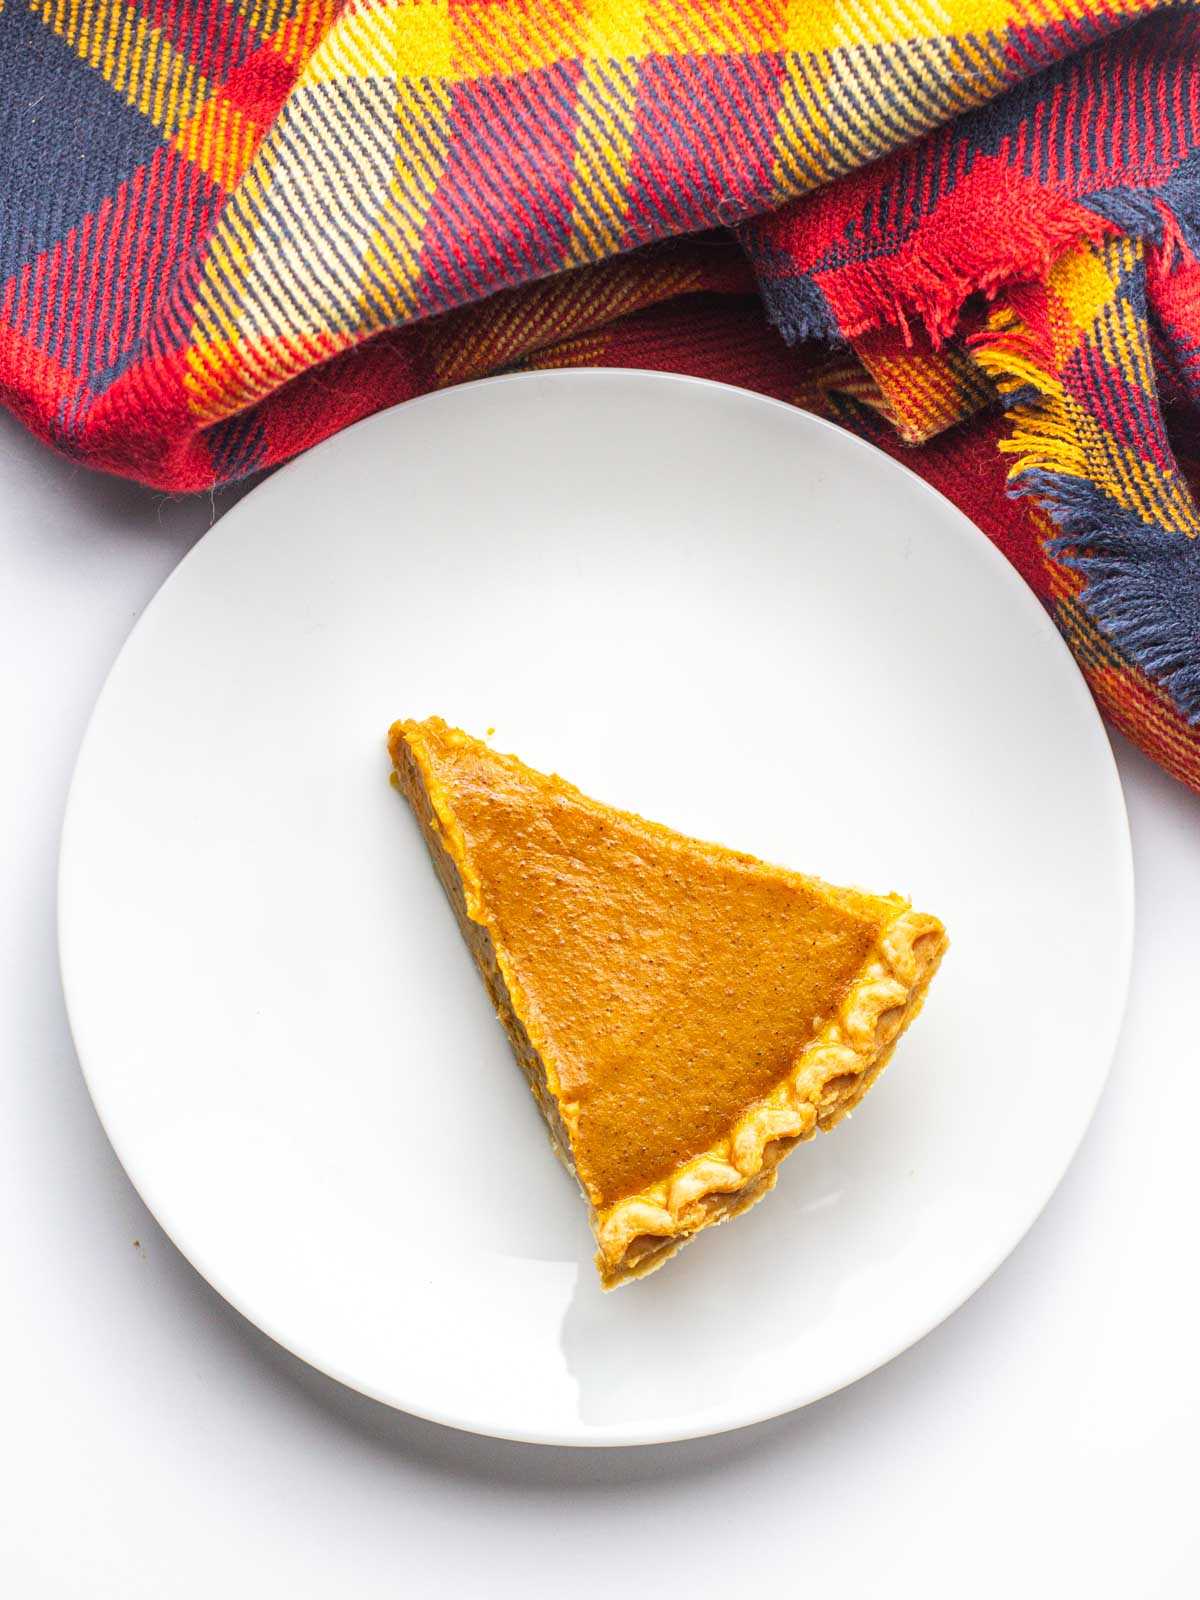 A slice of Fireball Pumpkin Pie on a round white plate with a red plaid cloth running along the top of the plate.